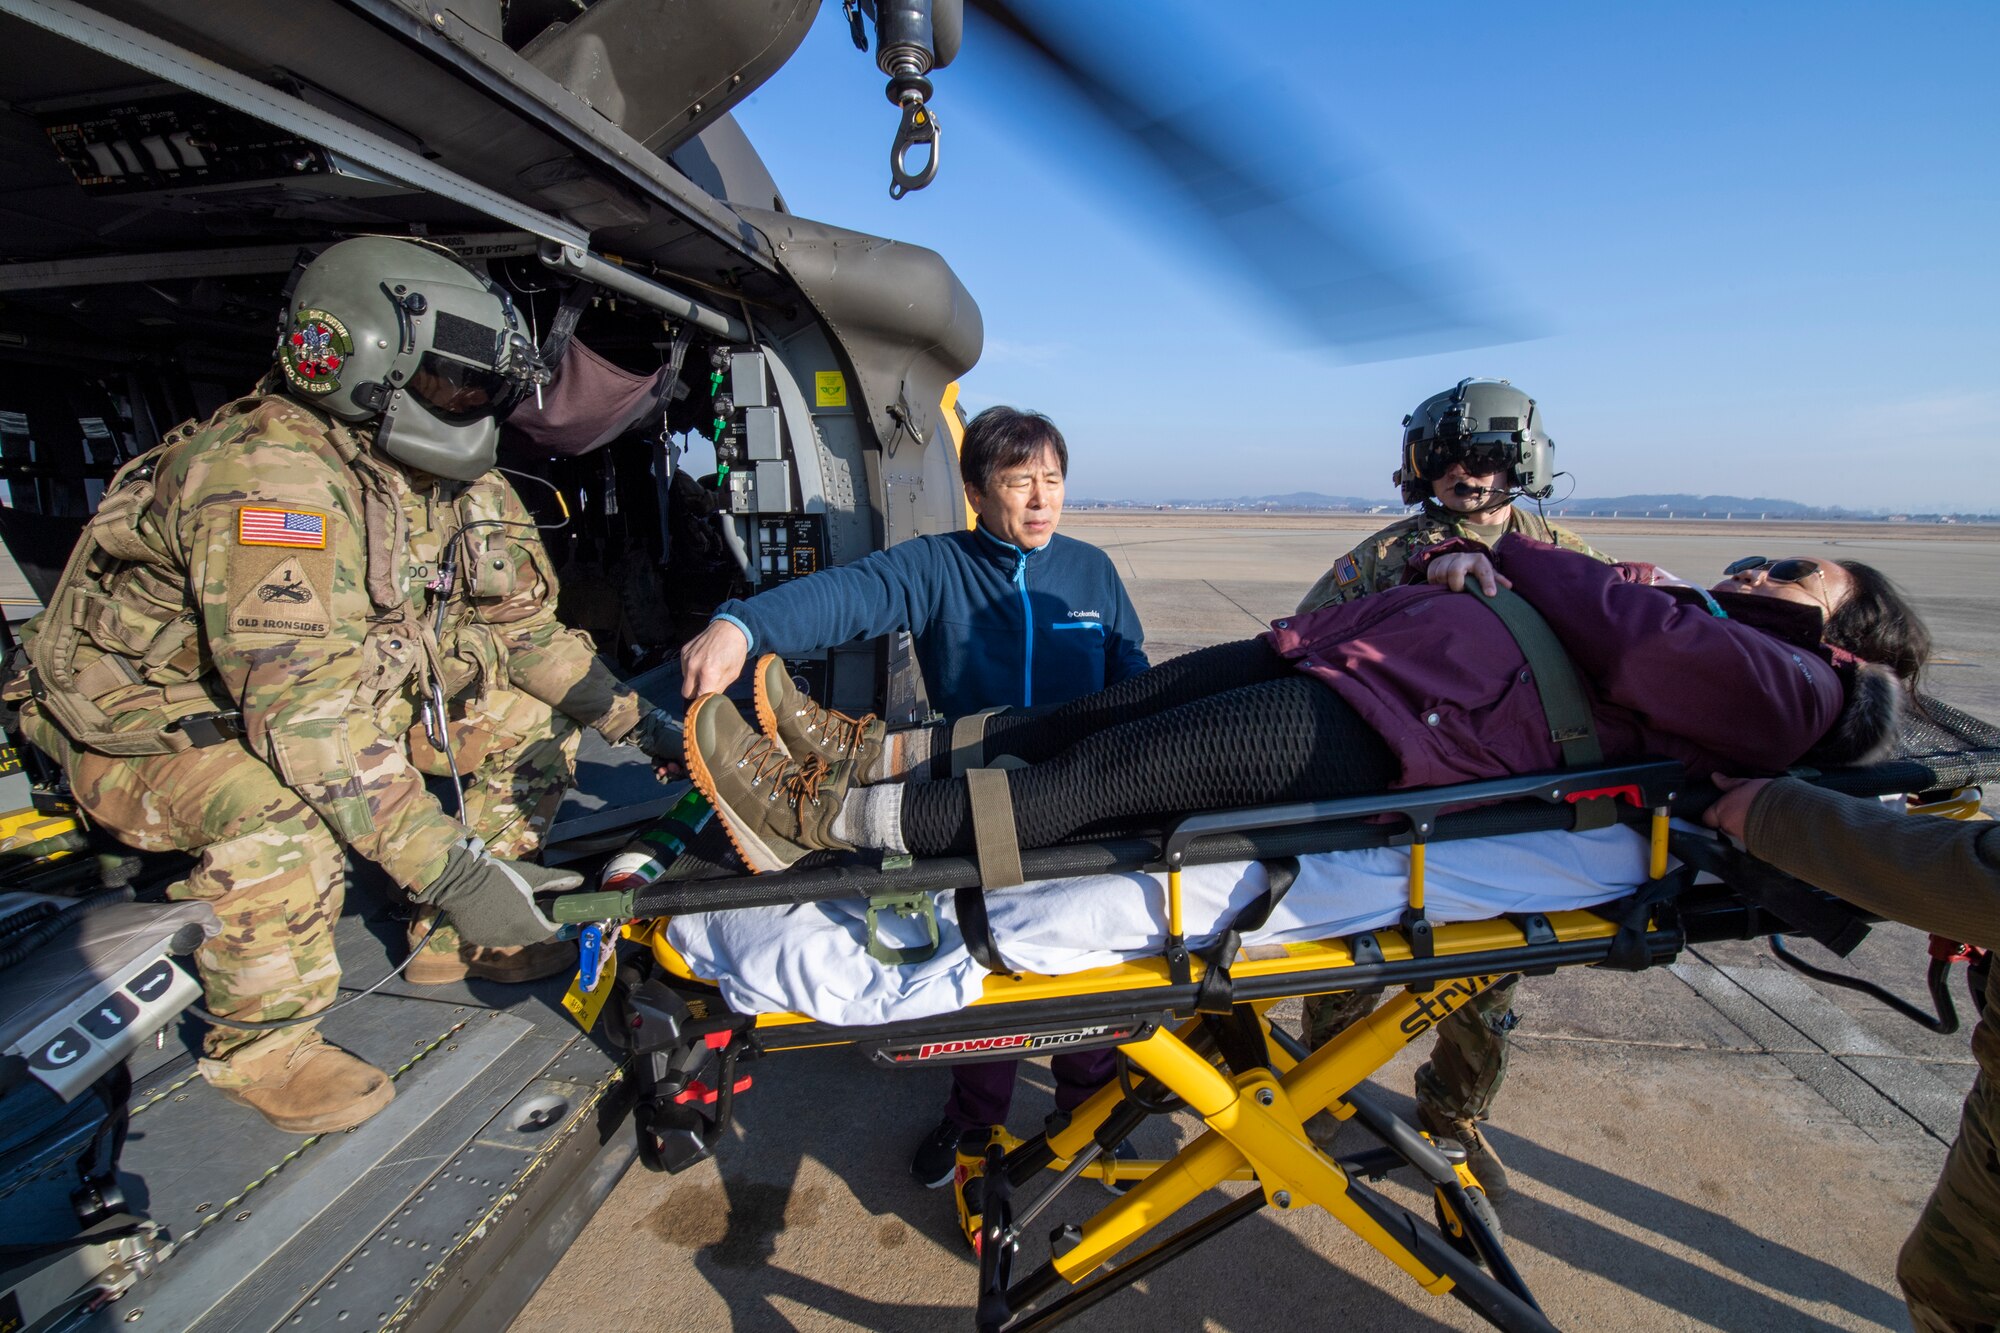 U.S. Army Spc. Noah Quevedo, 3-2 General Support Aviation Battalion crew chief, left, and Staff Sgt. Michael Mongia, 32nd GSAB flight paramedic, right, load U.S. Air Force Master Sgt. Maria Szymanski, 51st Medical Group urgent care flight chief and simulated trauma patient, into a HH-60M BlackHawk at Osan Air Base, Republic of Korea, Feb. 28, 2023. After loading, the patient was transported to the ROK Armed Forces Trauma Center for further treatment. The training enabled U.S. and ROK service members to strengthen interoperability while responding to emergency situations. (U.S. Air Force photo by Airman 1st Class Aaron Edwards)